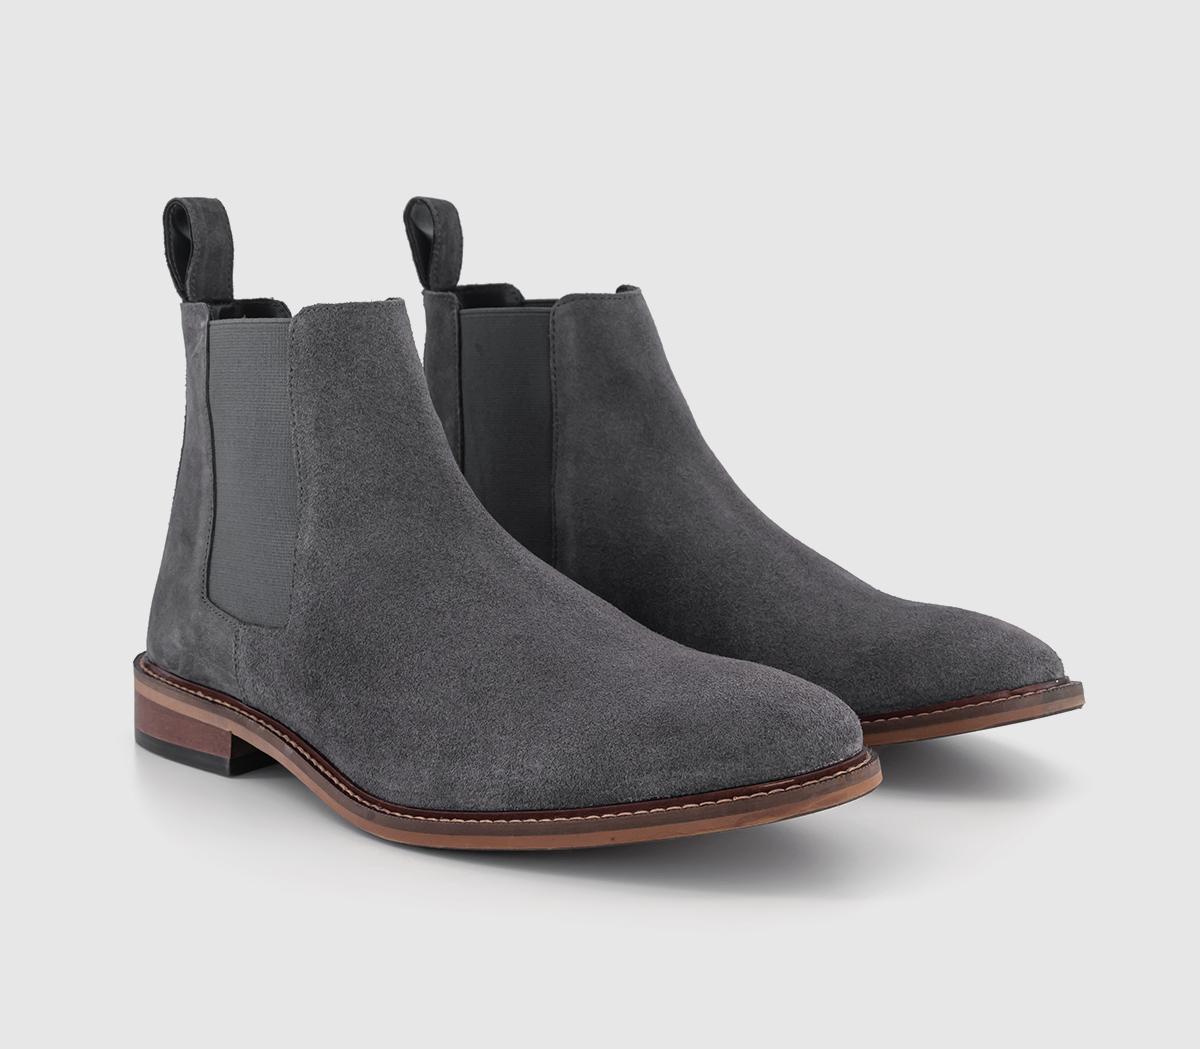 OFFICE Mens Beacon Chelsea Boots Grey Suede, 8